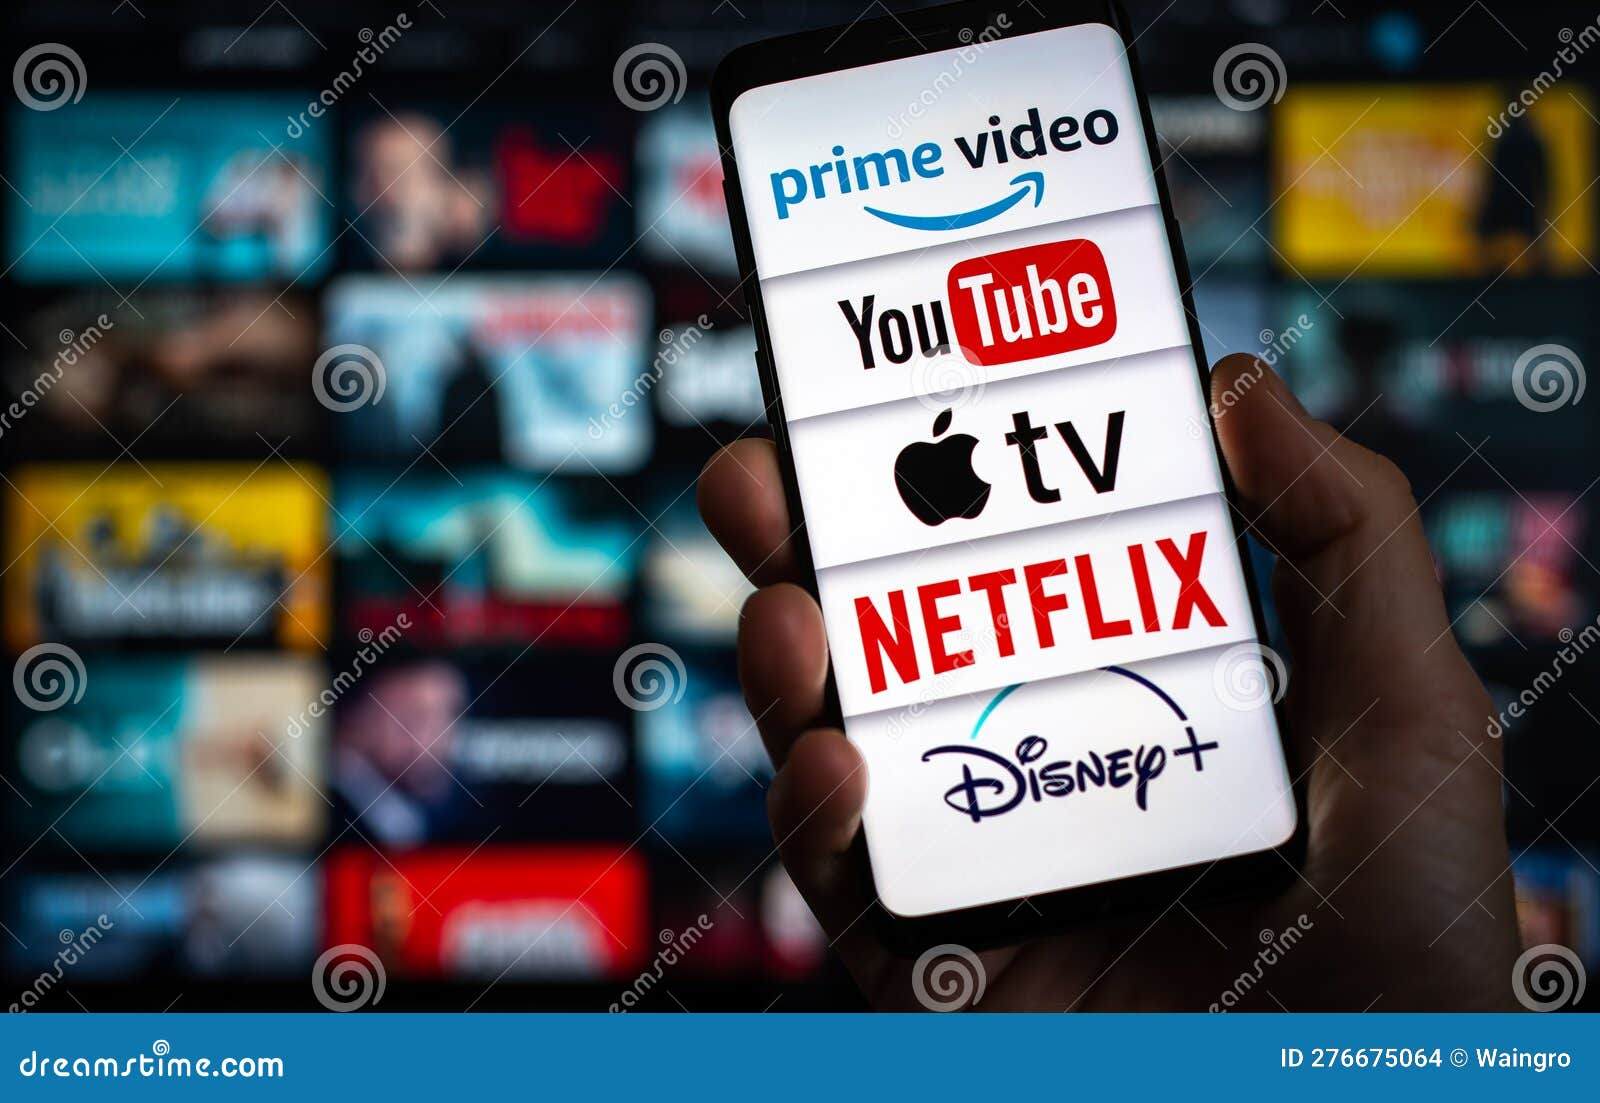 Video on Demand Services - Amazon Prime, Youtube, Apple TV, Netflx and Disney Editorial Stock Image